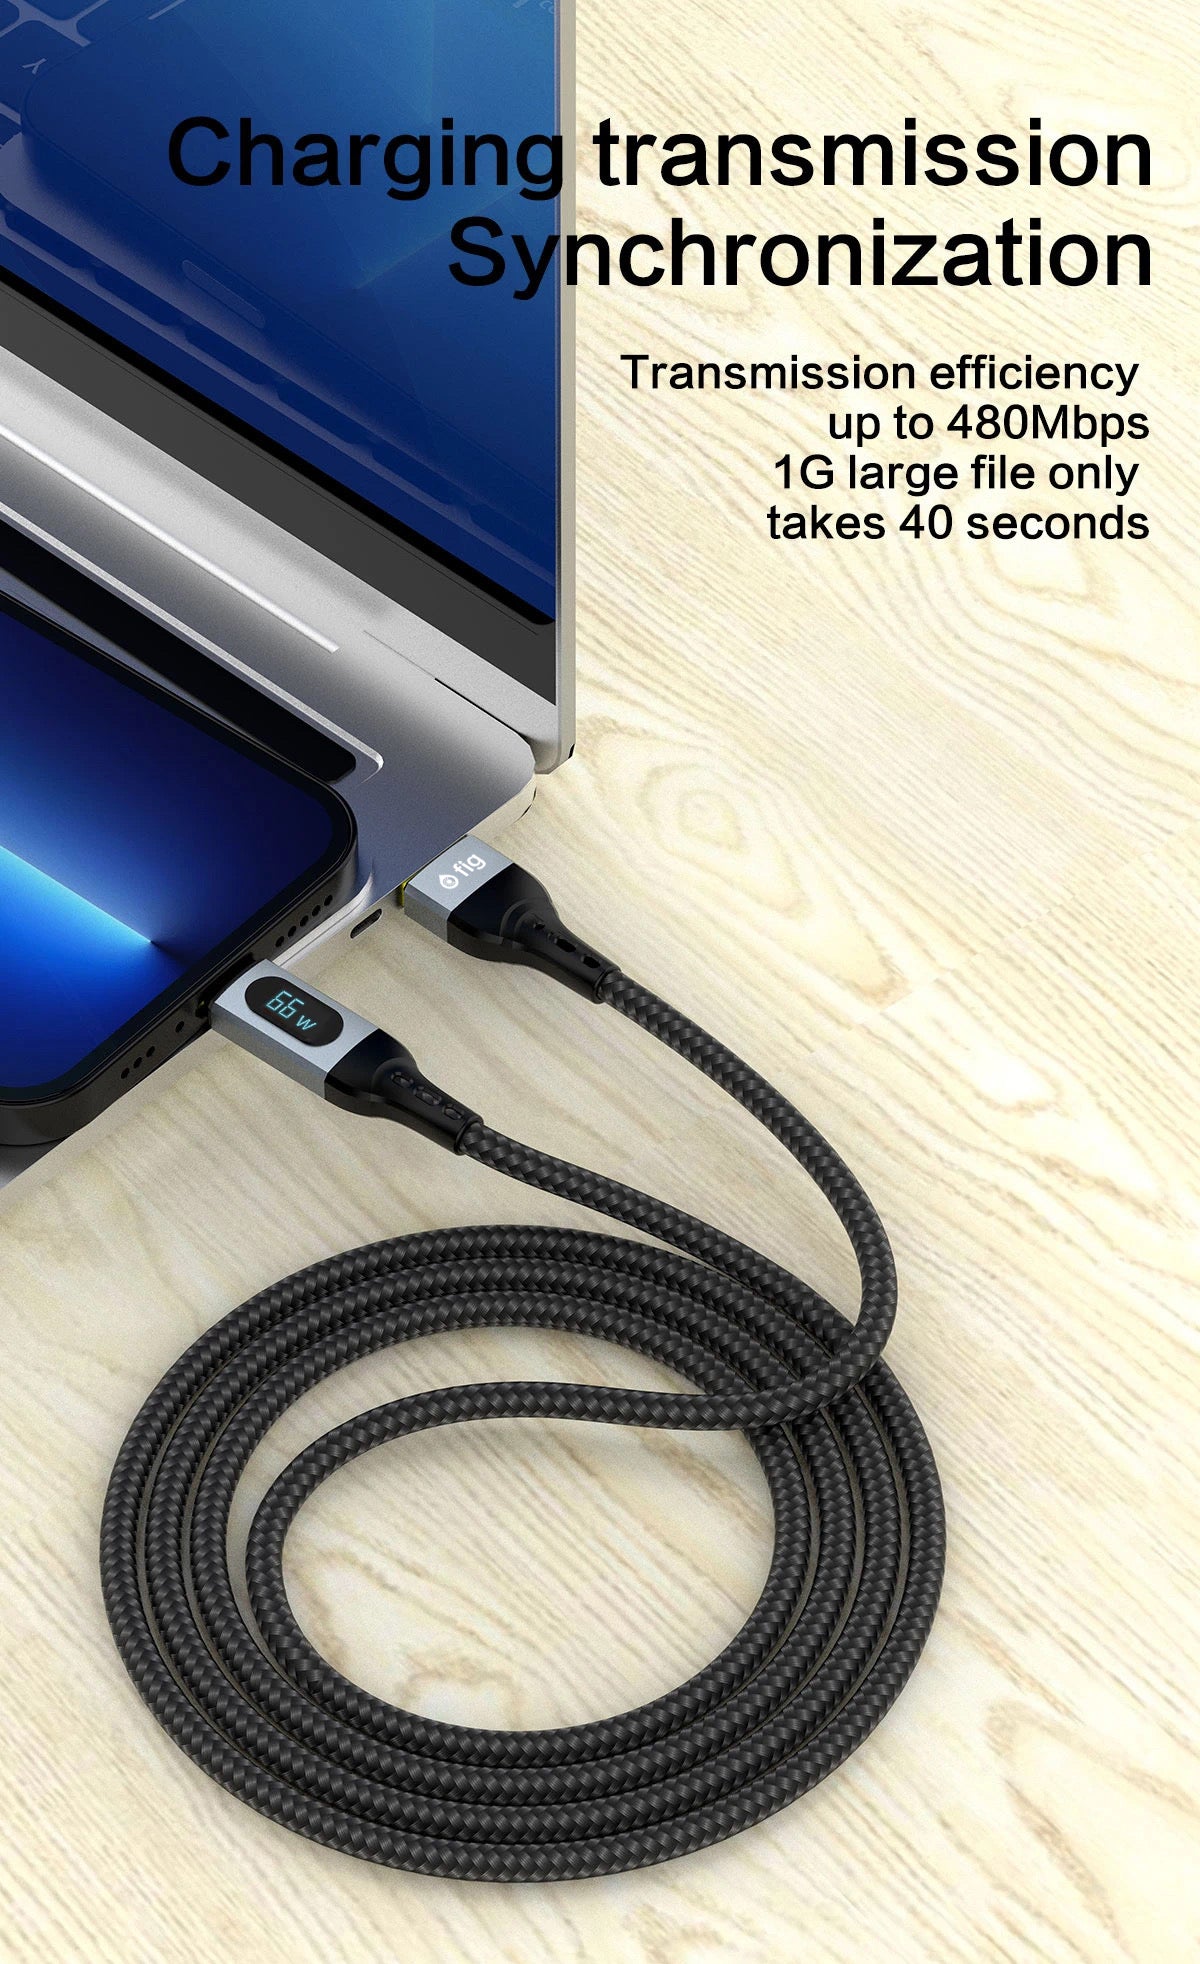 FIG DISPLAY FAST CHARGE CABLE TYPE C